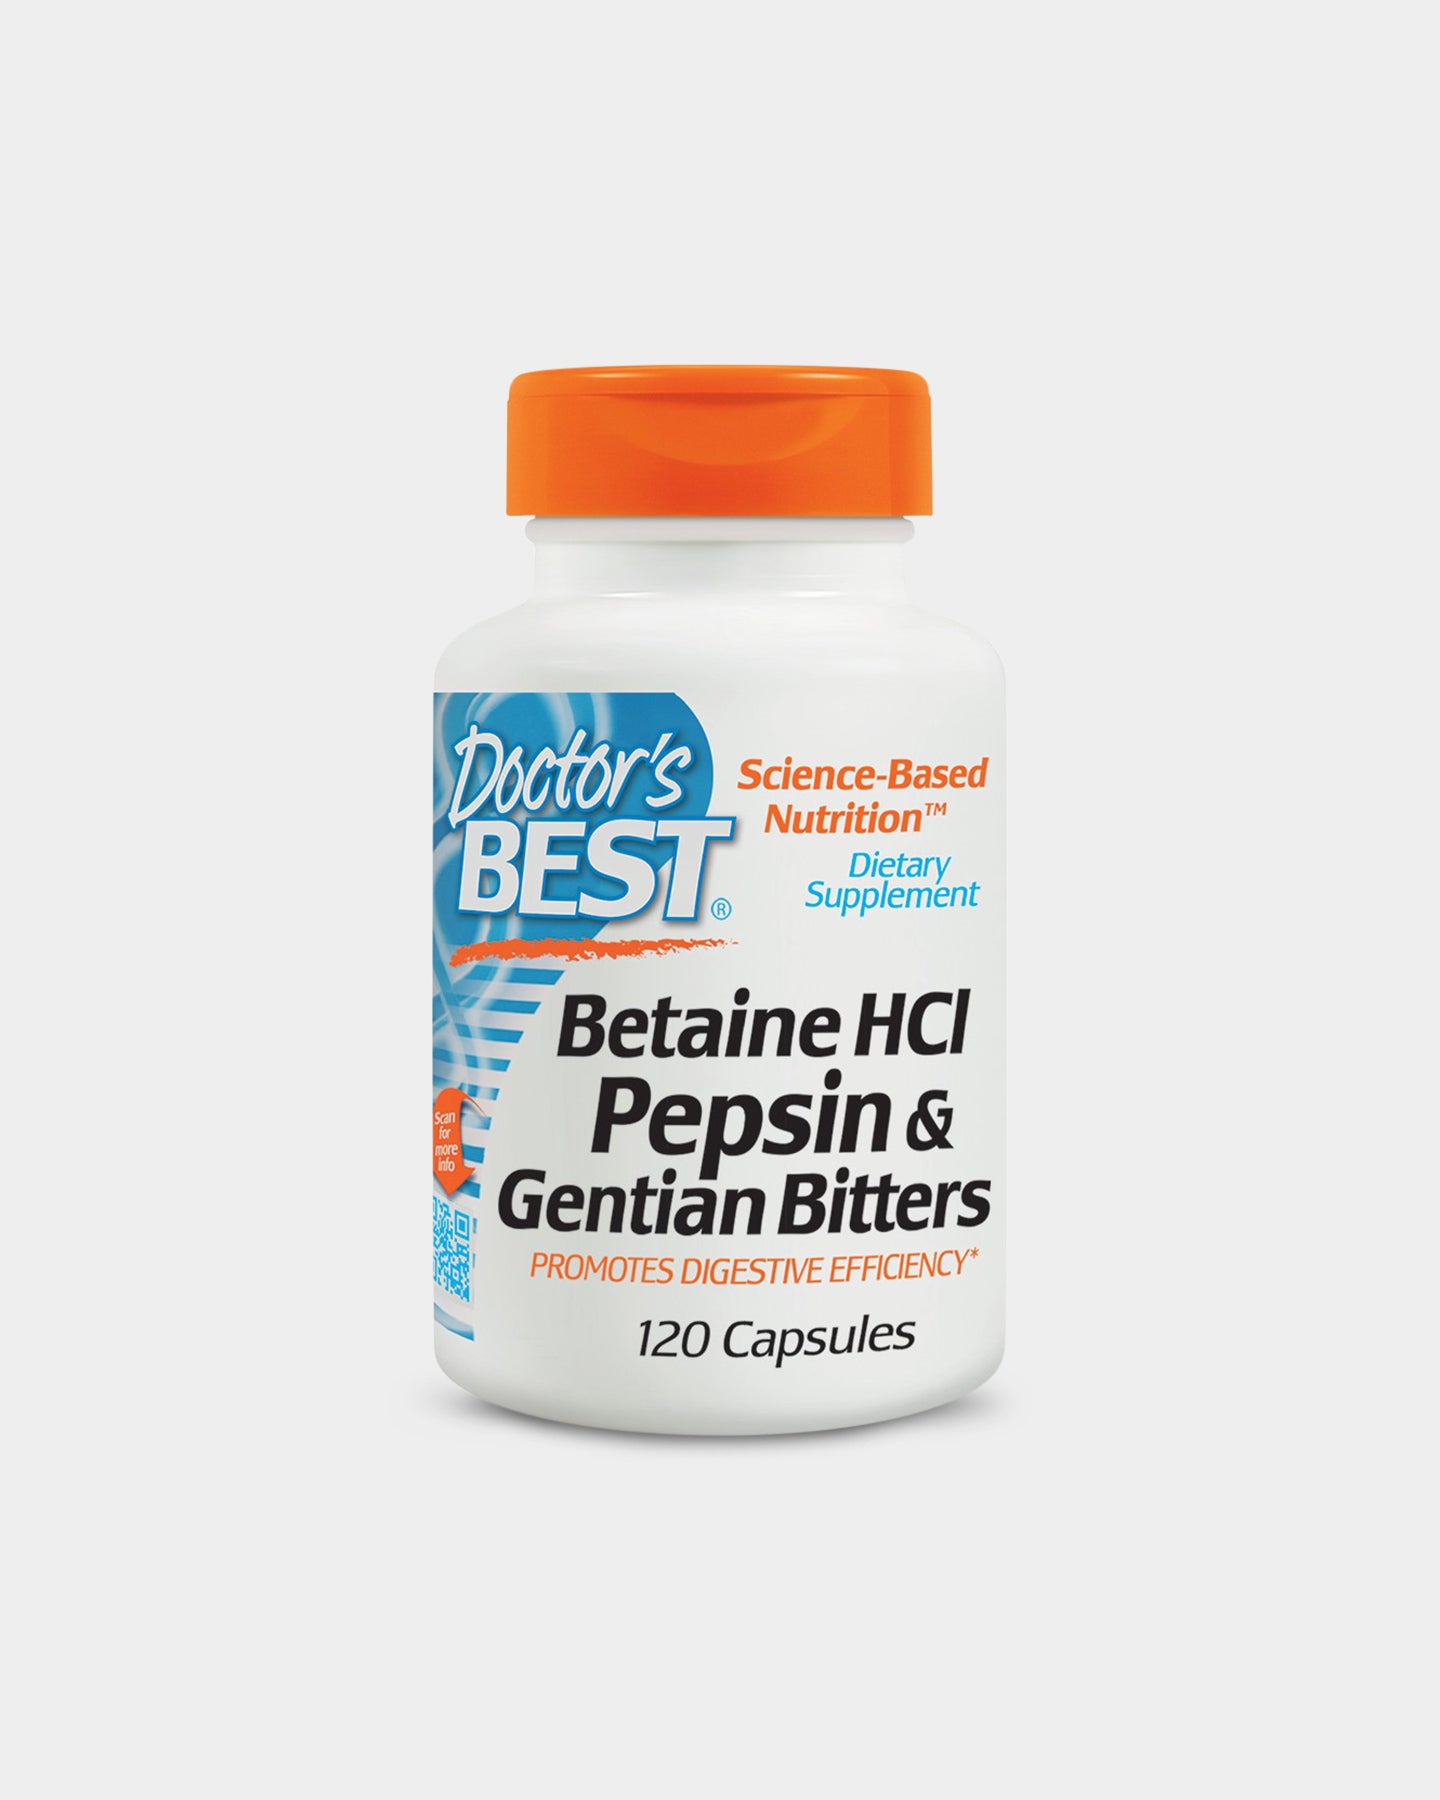 Image of Doctor's Best Betaine HCl